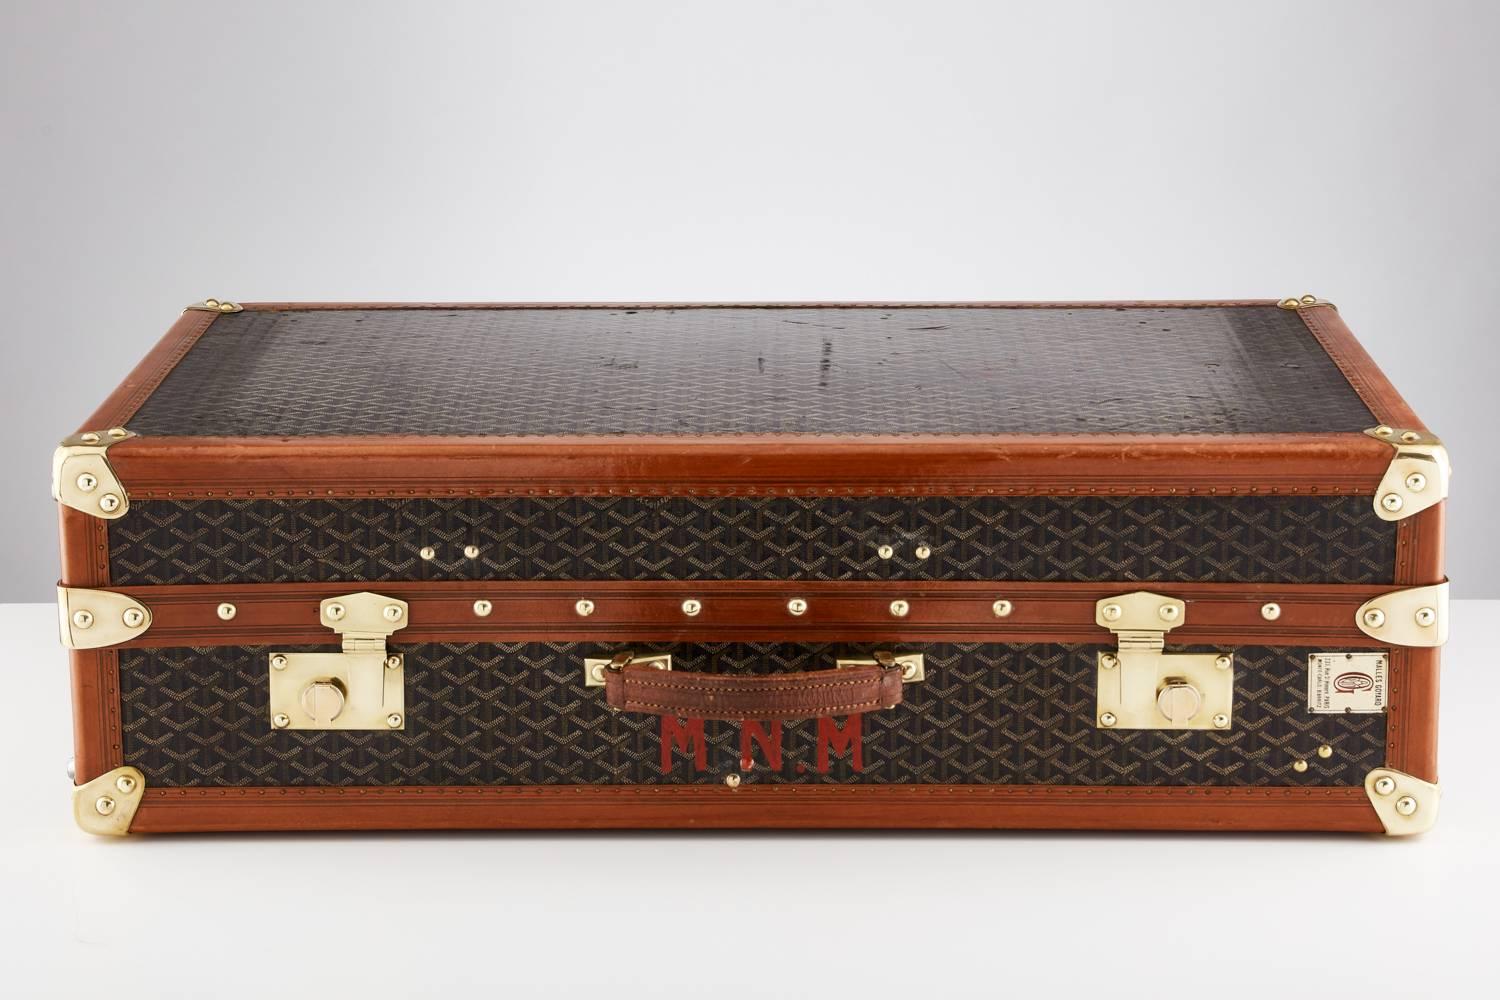 A 20th century vintage Goyard wardrobe trunk, circa 1930-1935.
This piece of beautiful luggage is signed through out.
The hardware especially the locks are superb quality.
The interior has drawers, with the words Goyard embroidered on the securing